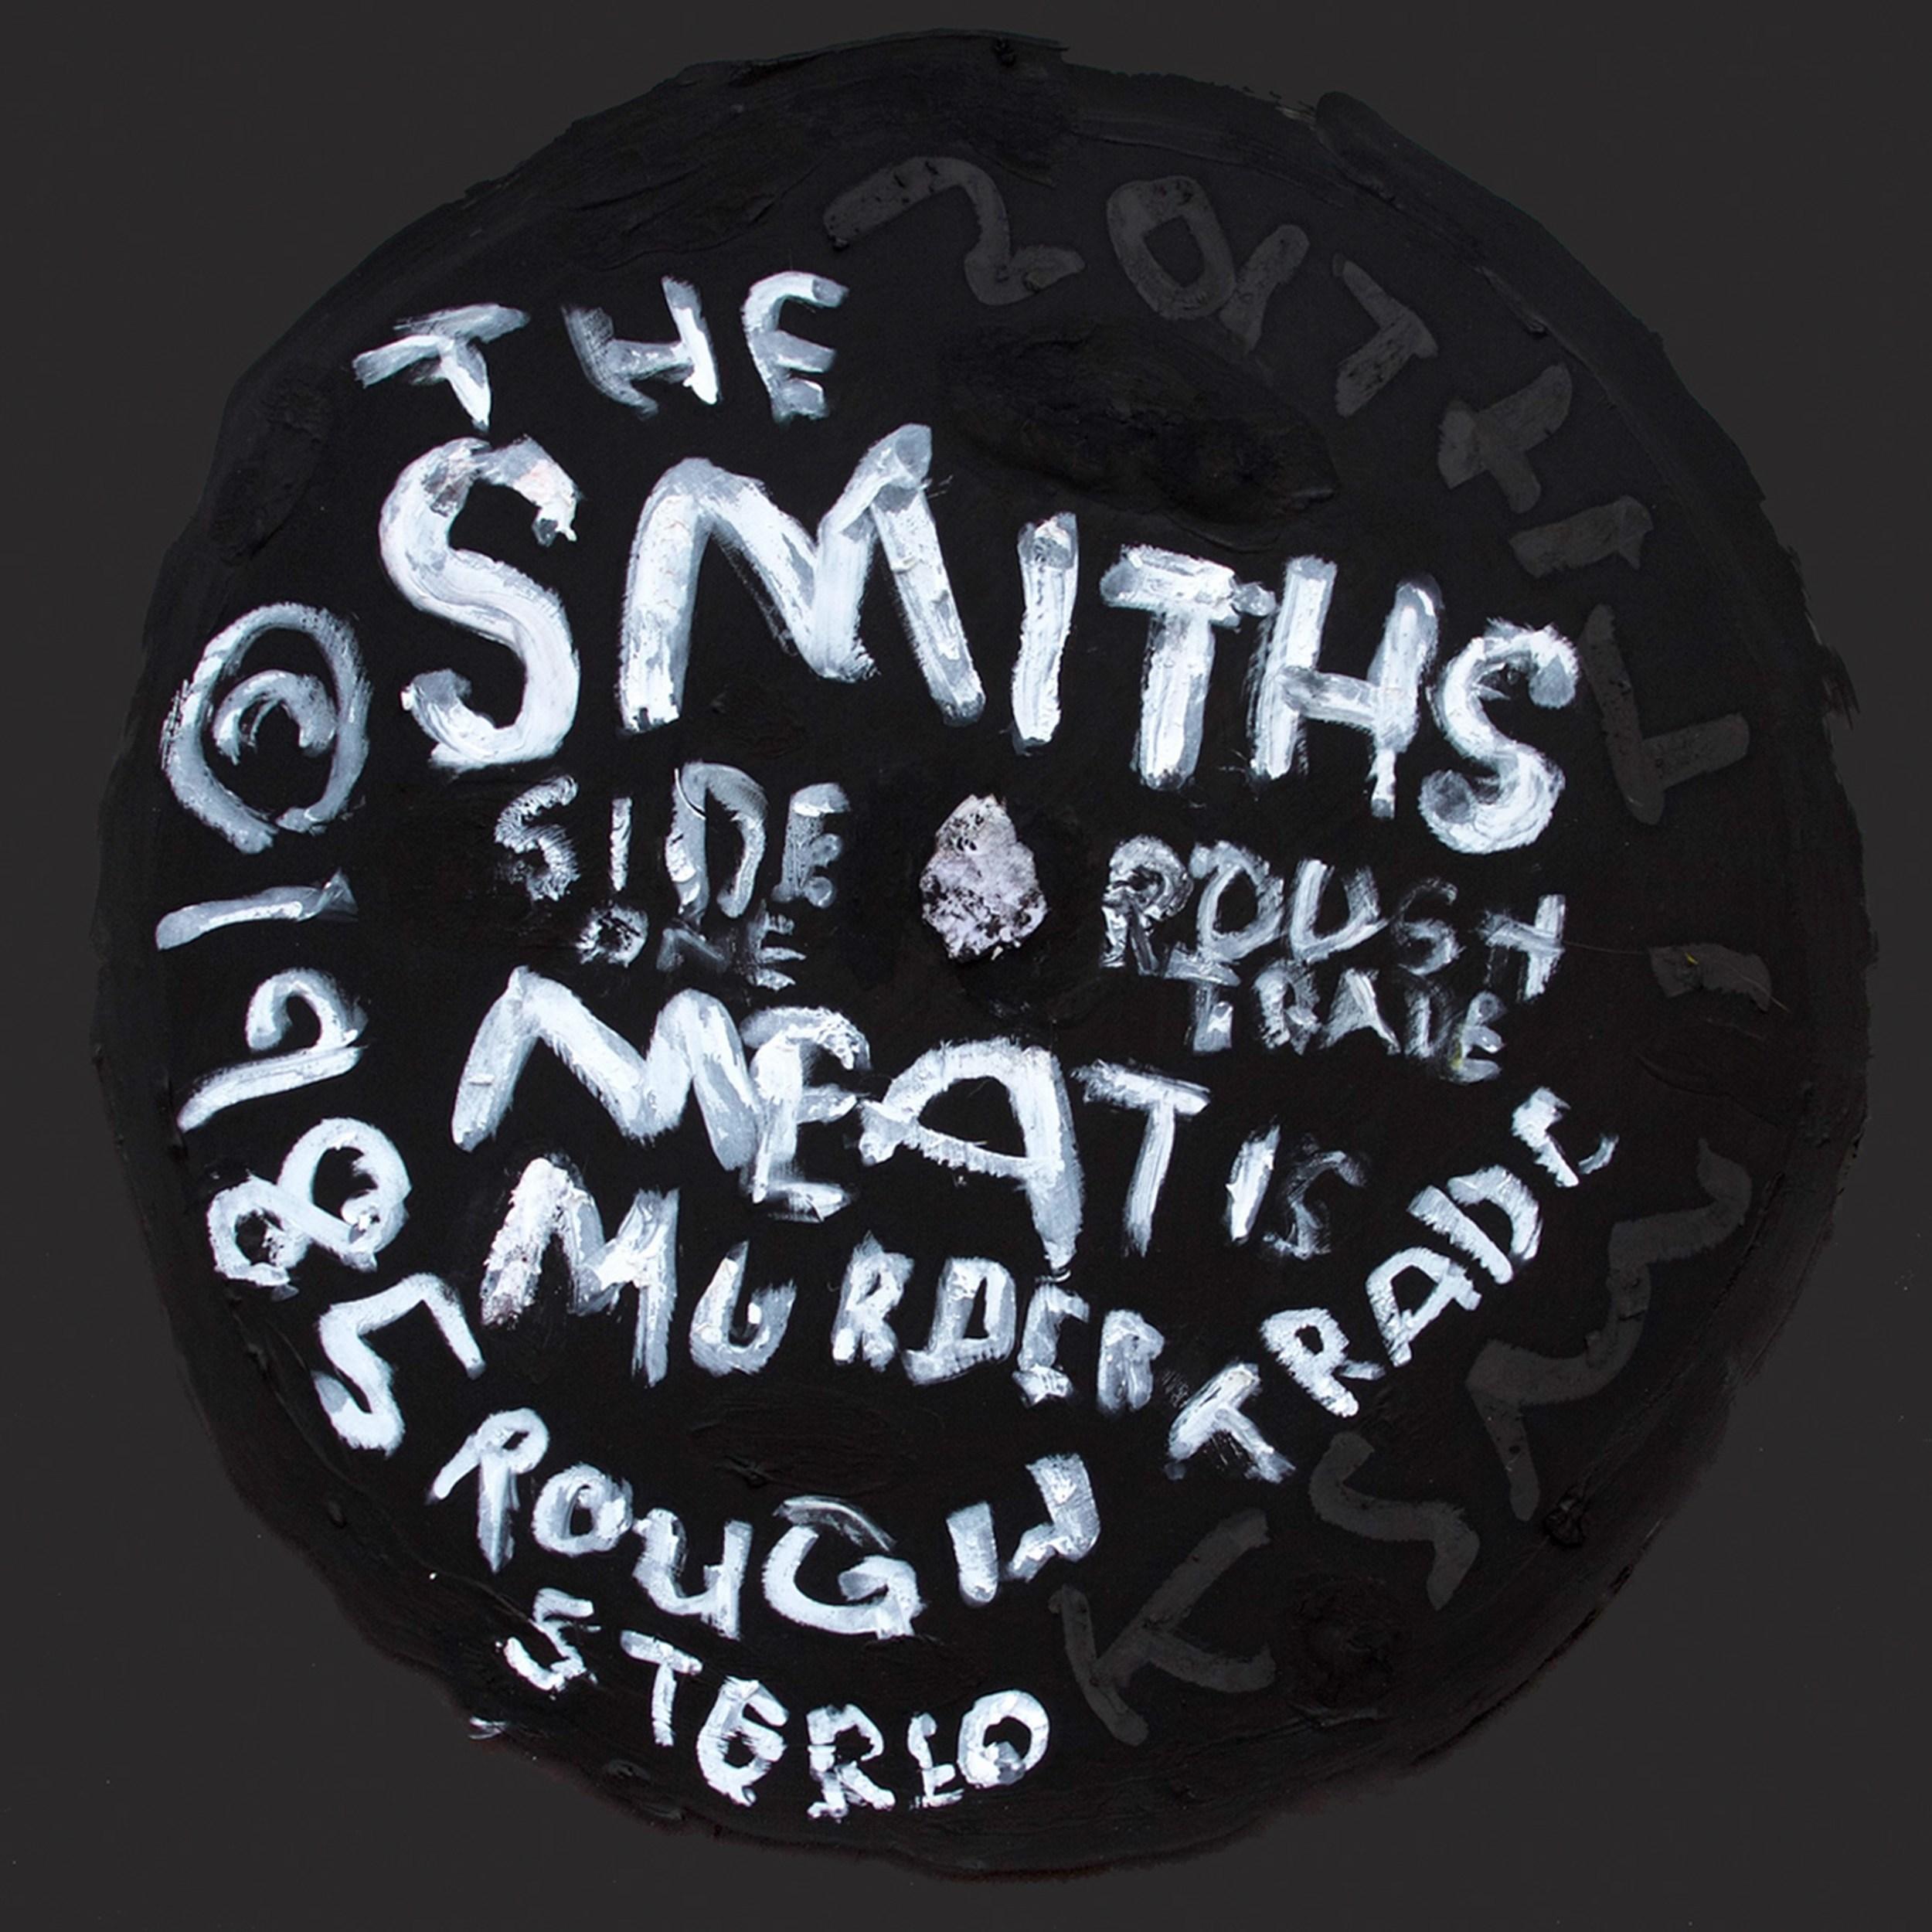 Kerry Smith Abstract Painting – The Smiths - Meat Is Murder (Plattenlabel, Ticketabschnitte, Setlists, Pop Art) 